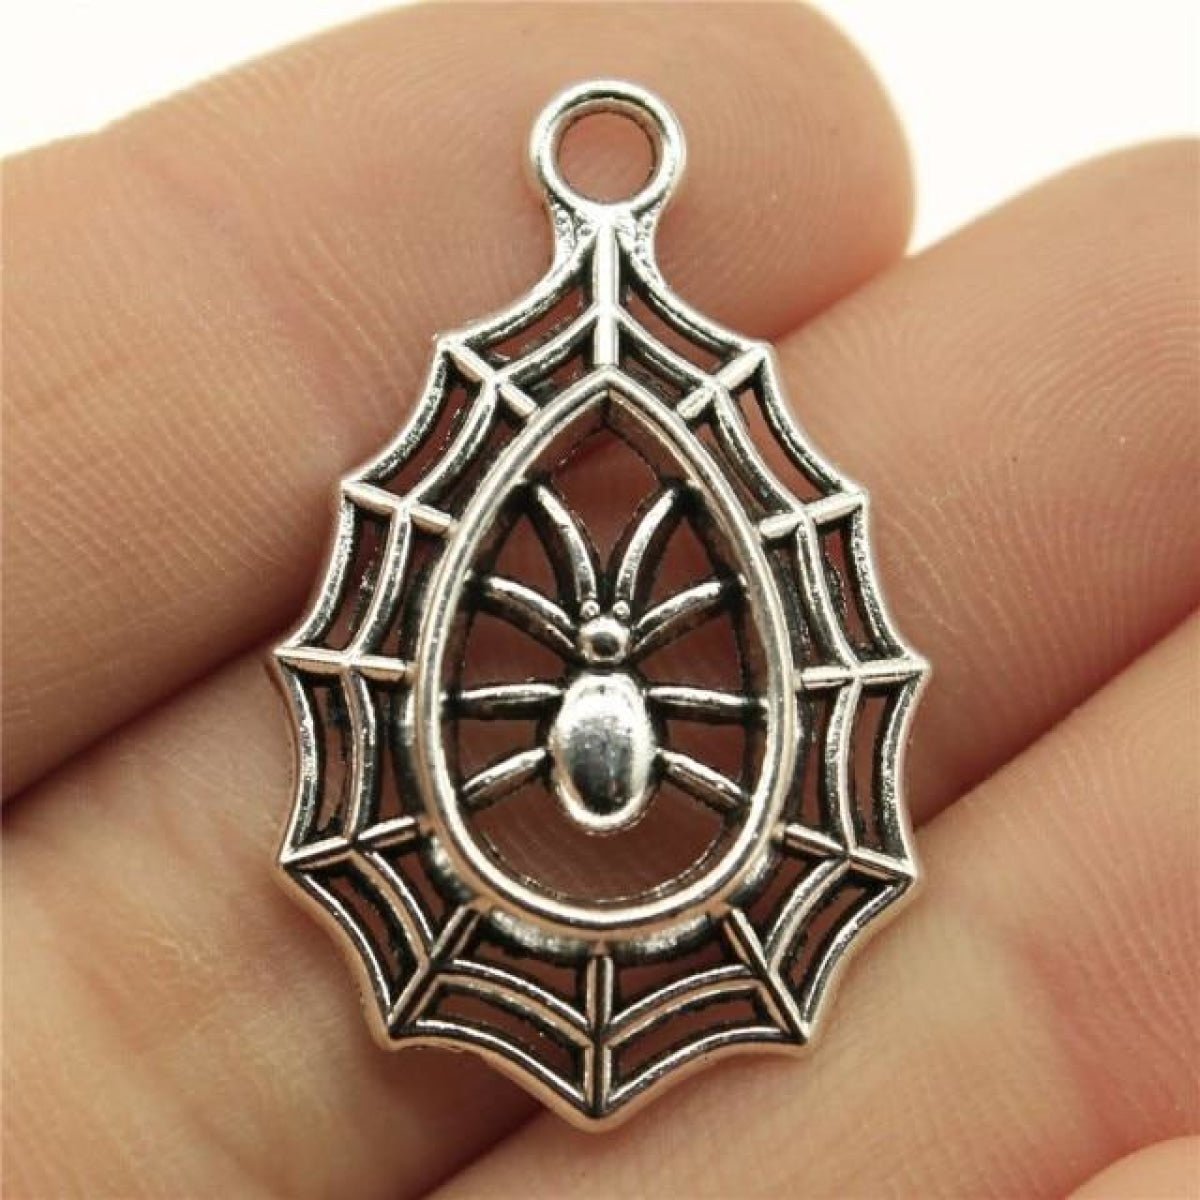 4pcs Spider Charms Antique Silver Colour Spider Charms Pendants For Bracelets Spider Cobweb Charms Making Jewellery - G - - Asia Sell